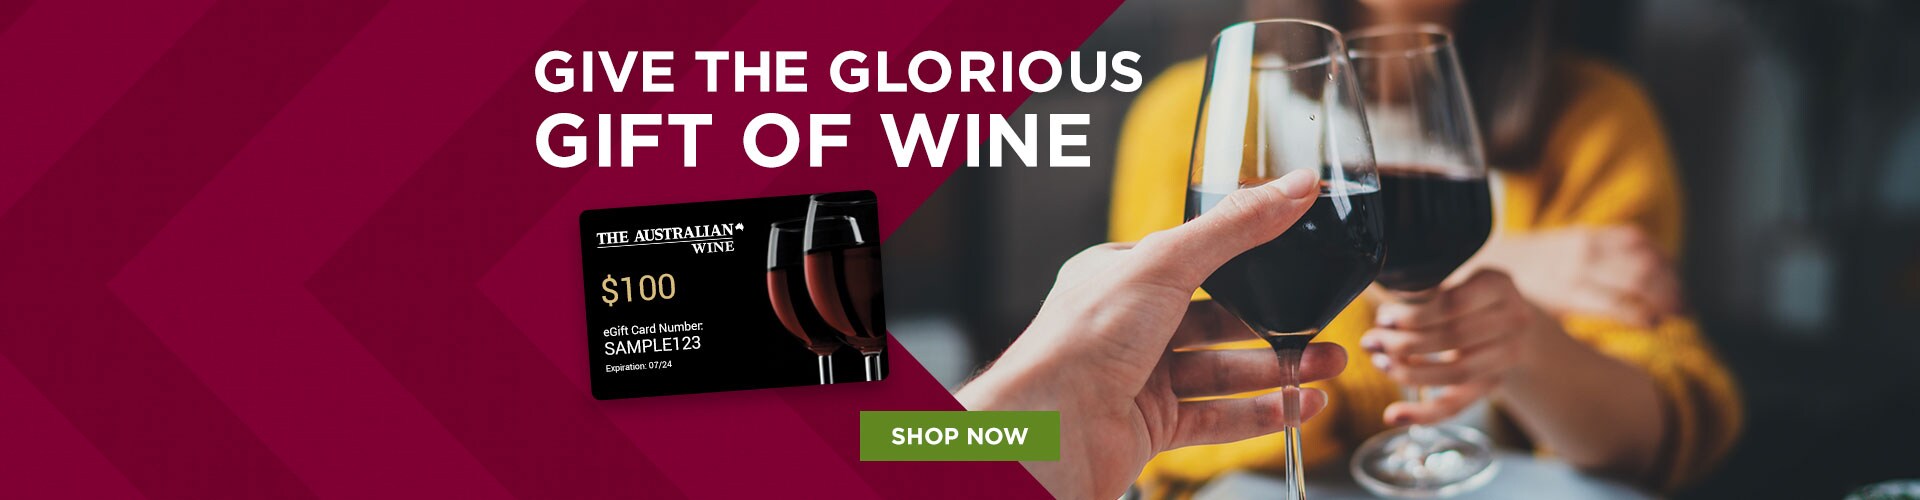 Give the Glorious Gift of Wine